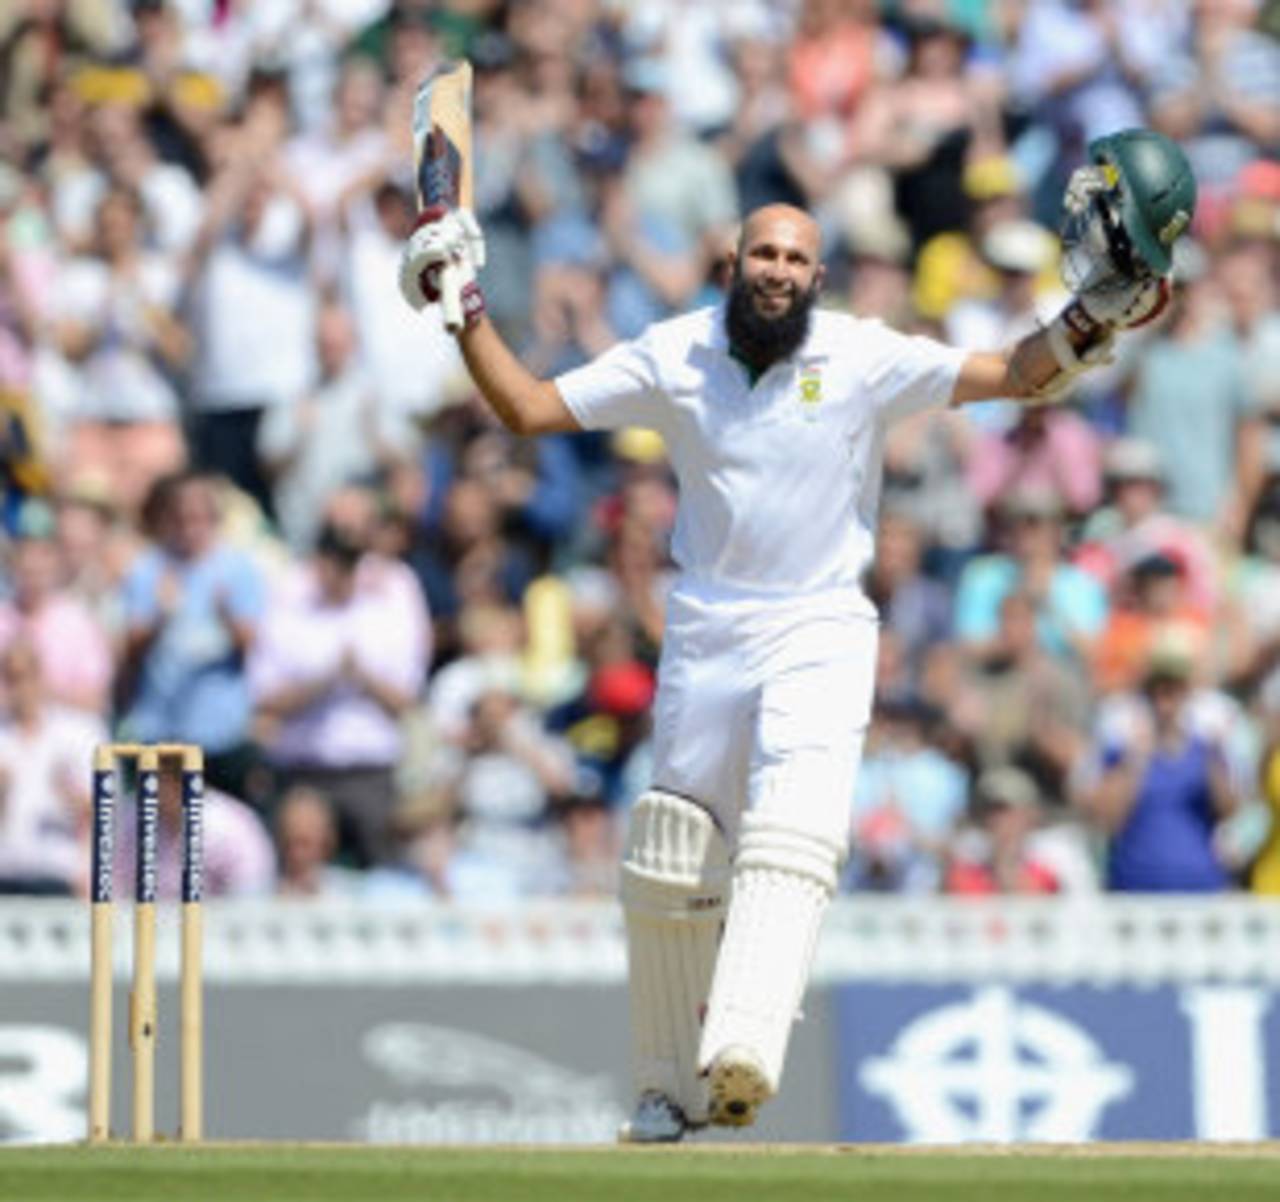 Hashim Amla brought up his second Test double century, England v South Africa, 1st Investec Test, The Oval, 4th day, July, 22, 2012